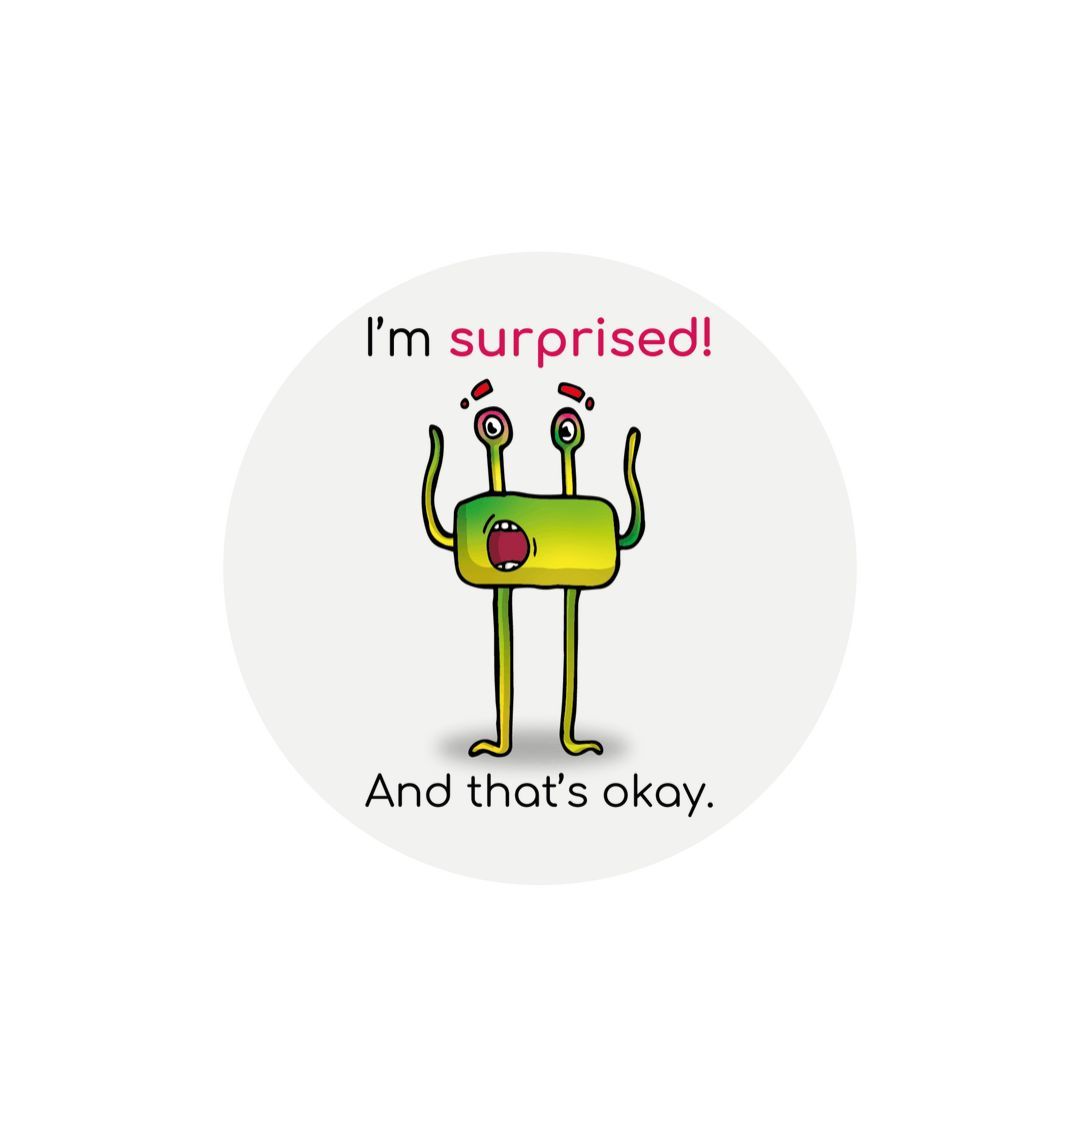 White \"I'm surprised! And that's okay!\" Round Children's Emotions Sticker 60mm x 60mm